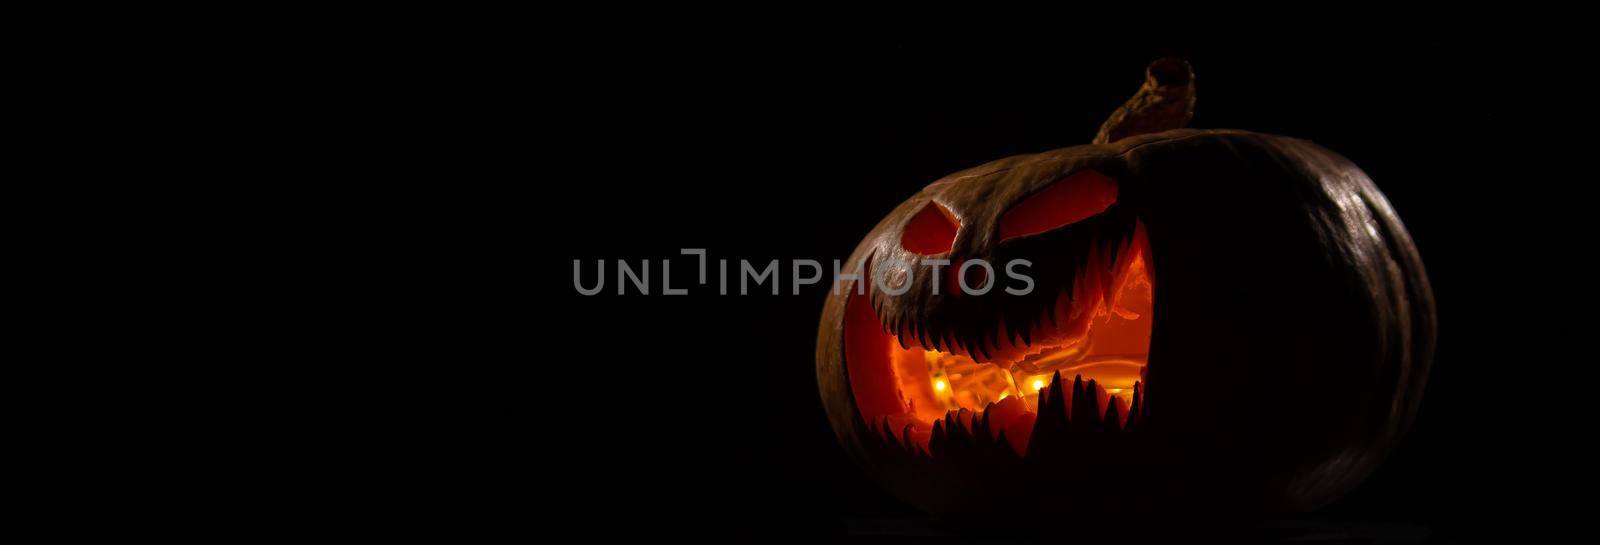 A creepy pumpkin with a carved grimace glows. Jack on a lantern in the dark